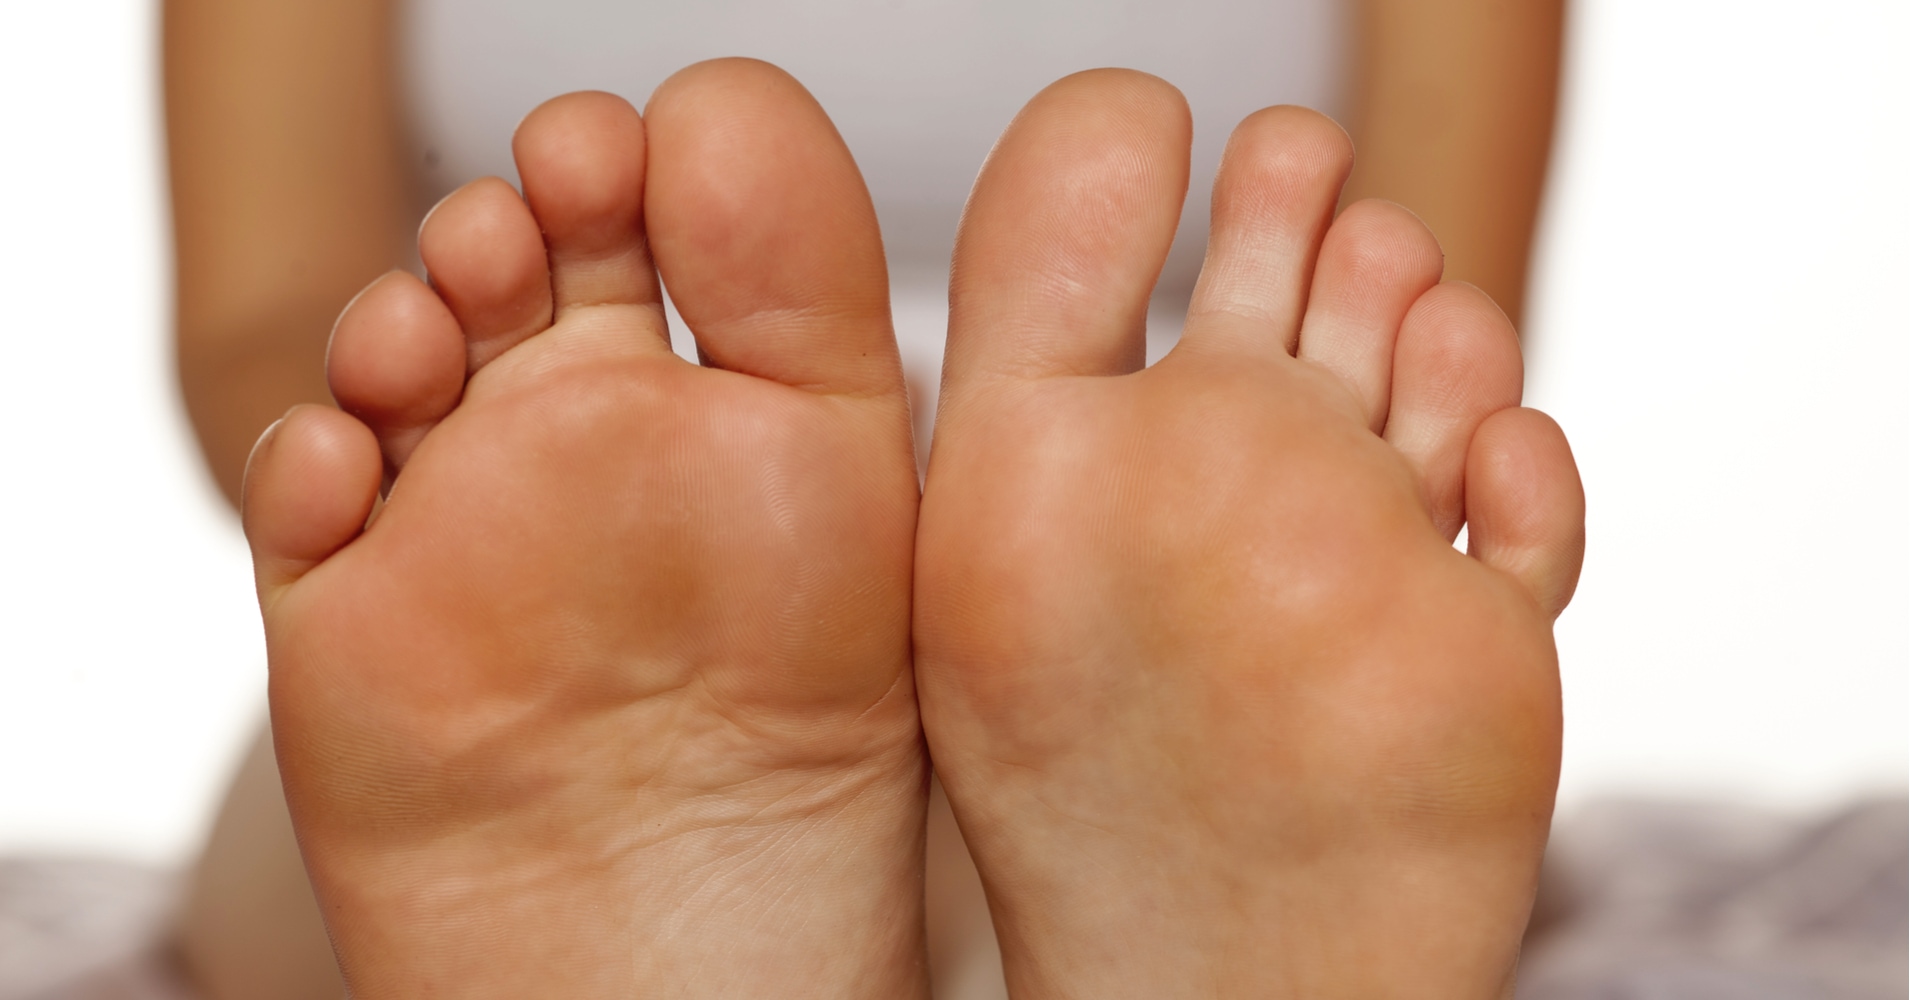 What Does Your Foot Shape Say About Your Personality Question 1 Is Your Big Toe Your Longest Toe